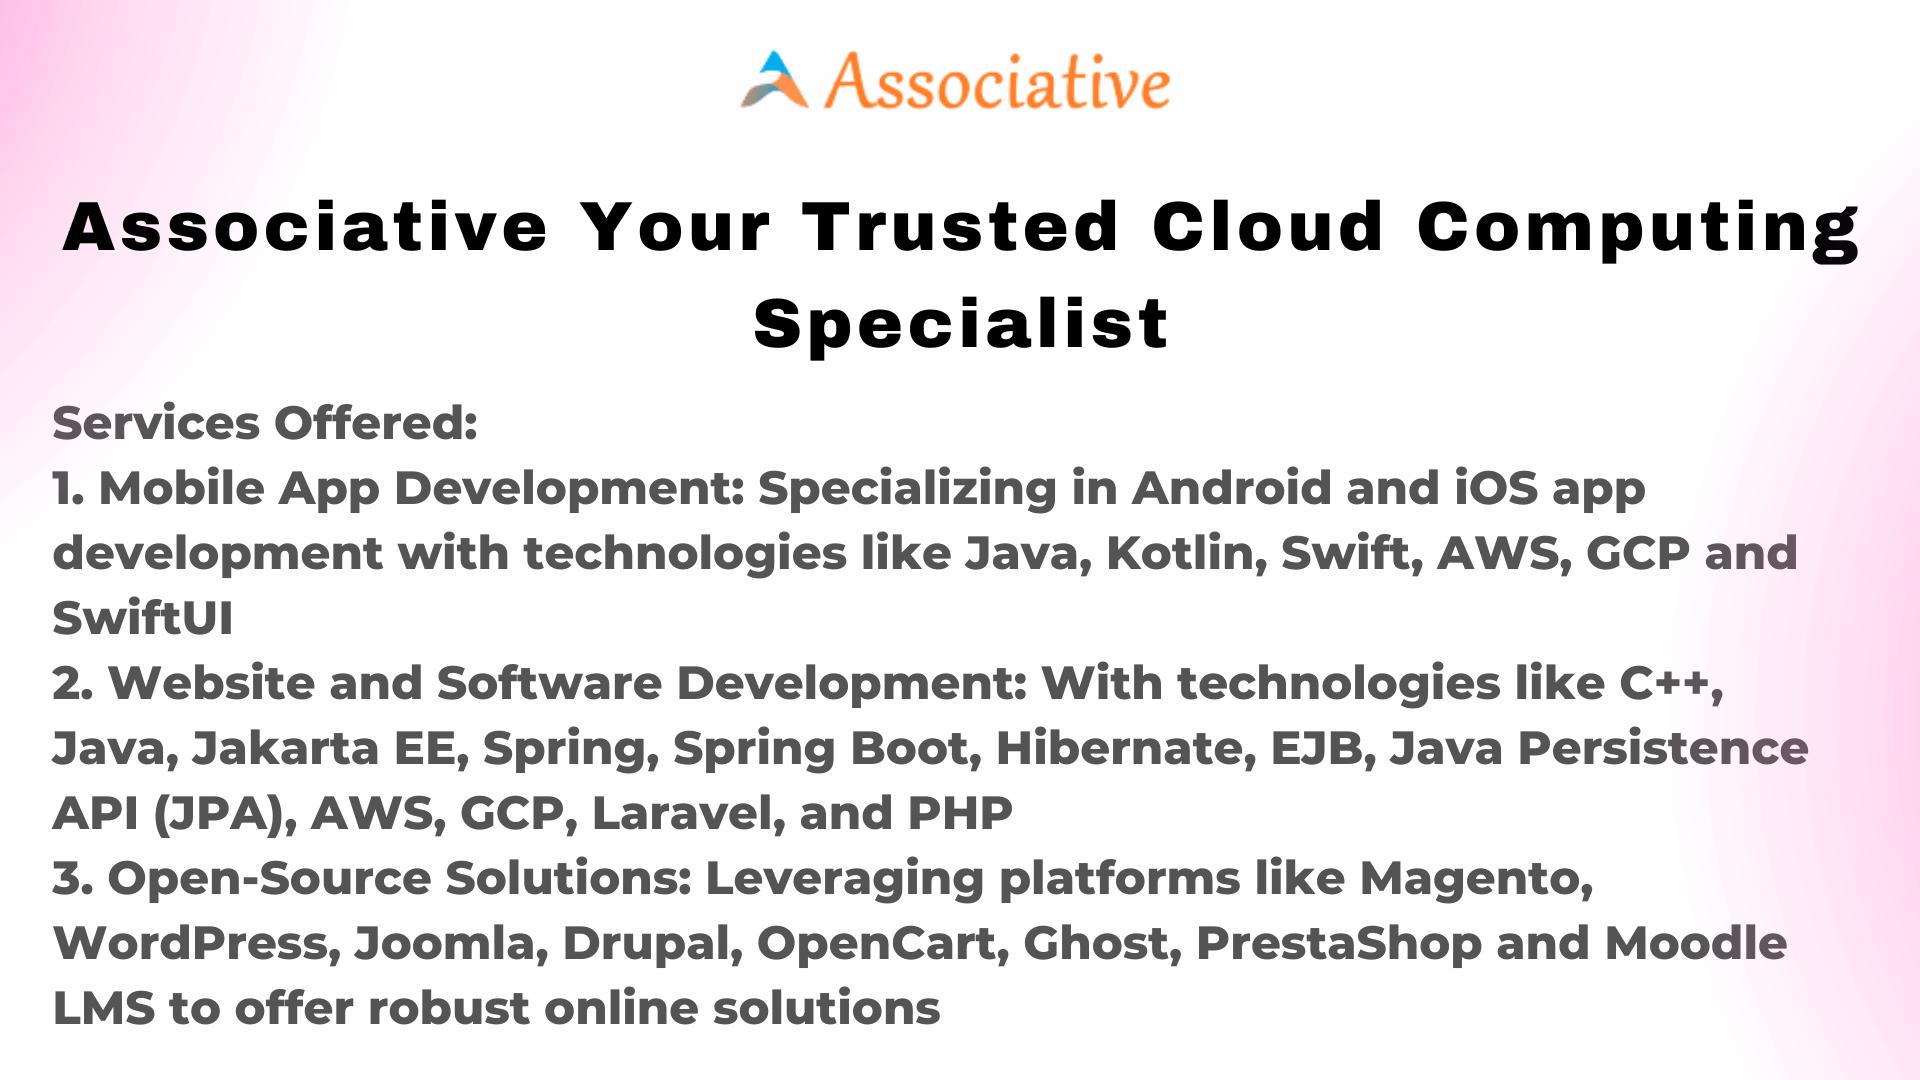 Associative Your Trusted Cloud Computing Specialist